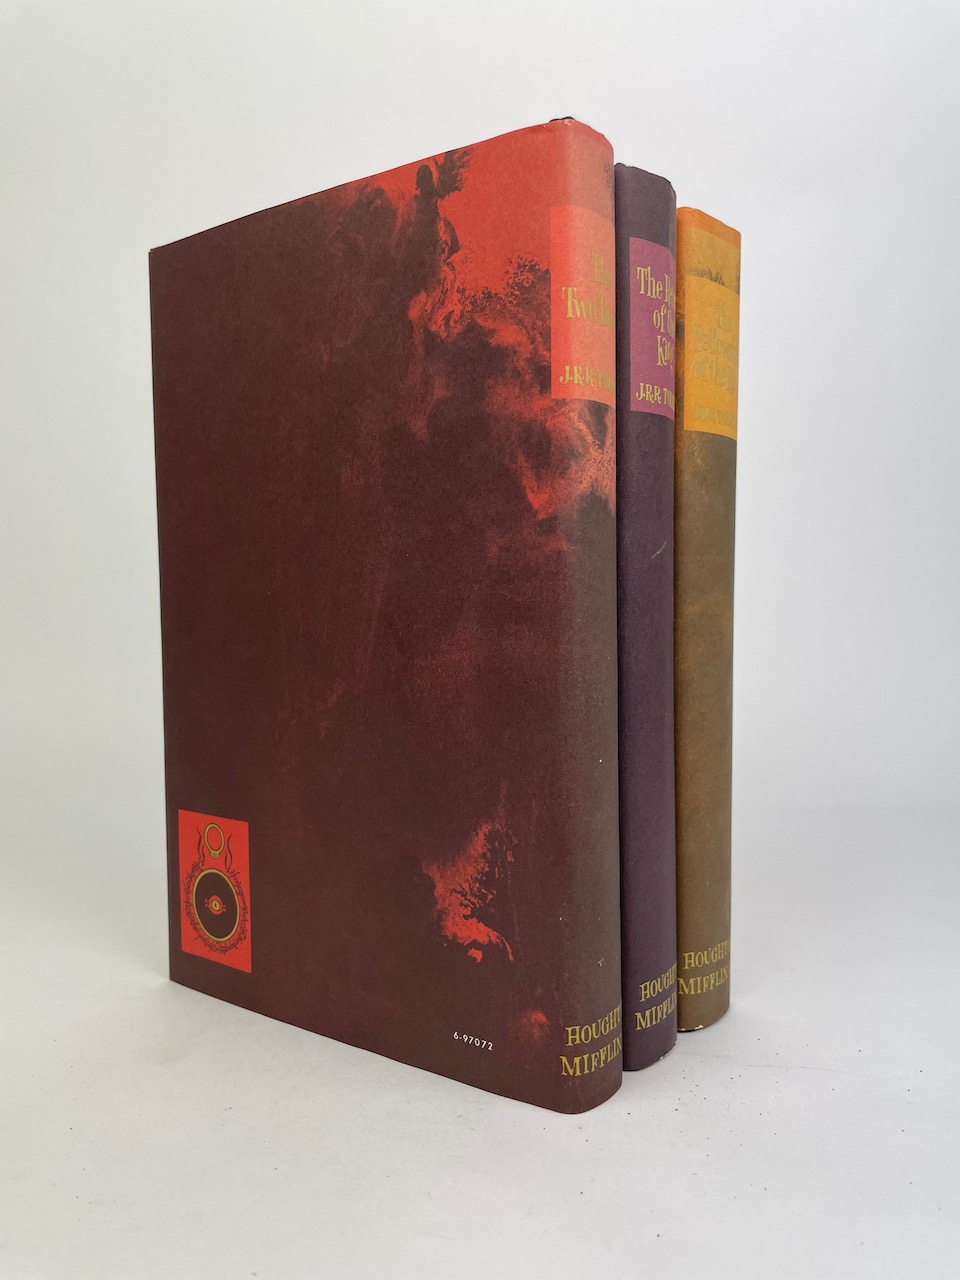 The Lord of the Rings, 2nd US Edition in Original Publishers Slipcase 9th/8th/8th 8